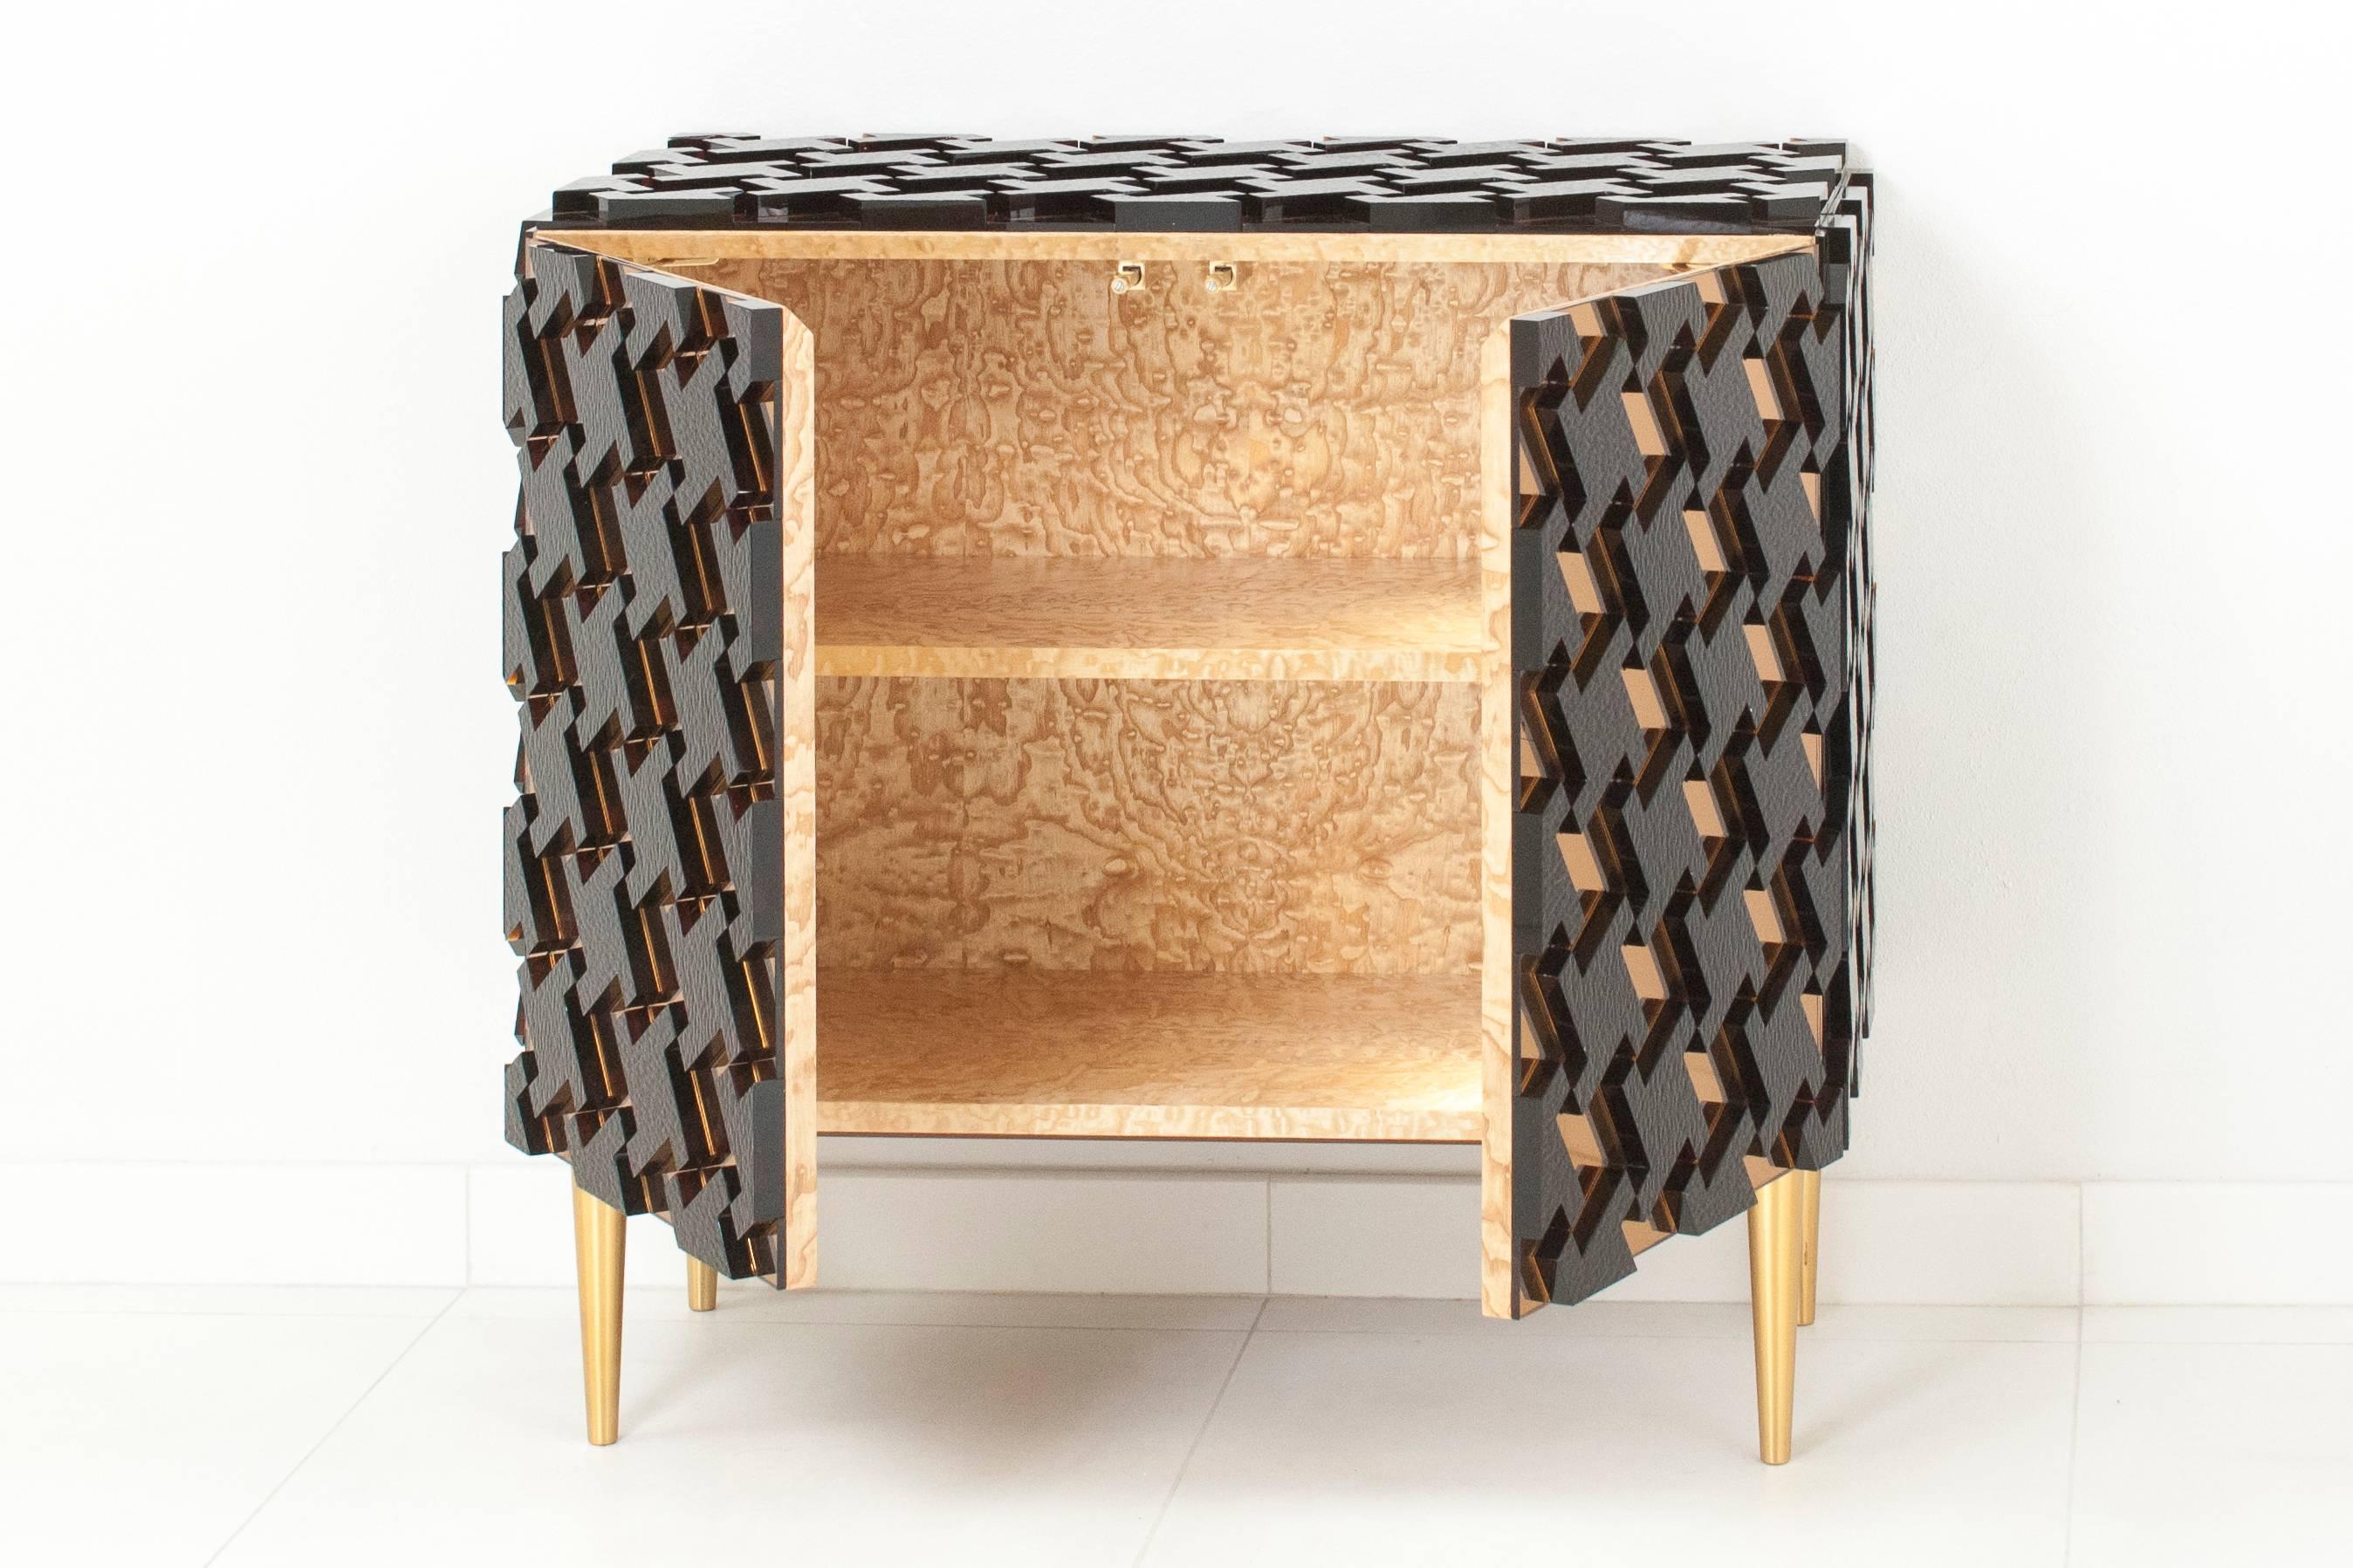 Unique piece, featuring a houndstooth pattern made of apricot mirrored glass overlaid with rippled amber glass sections, raised on brass legs, which feature a leveling system. The blonde wood interior holds one shelf. Model 